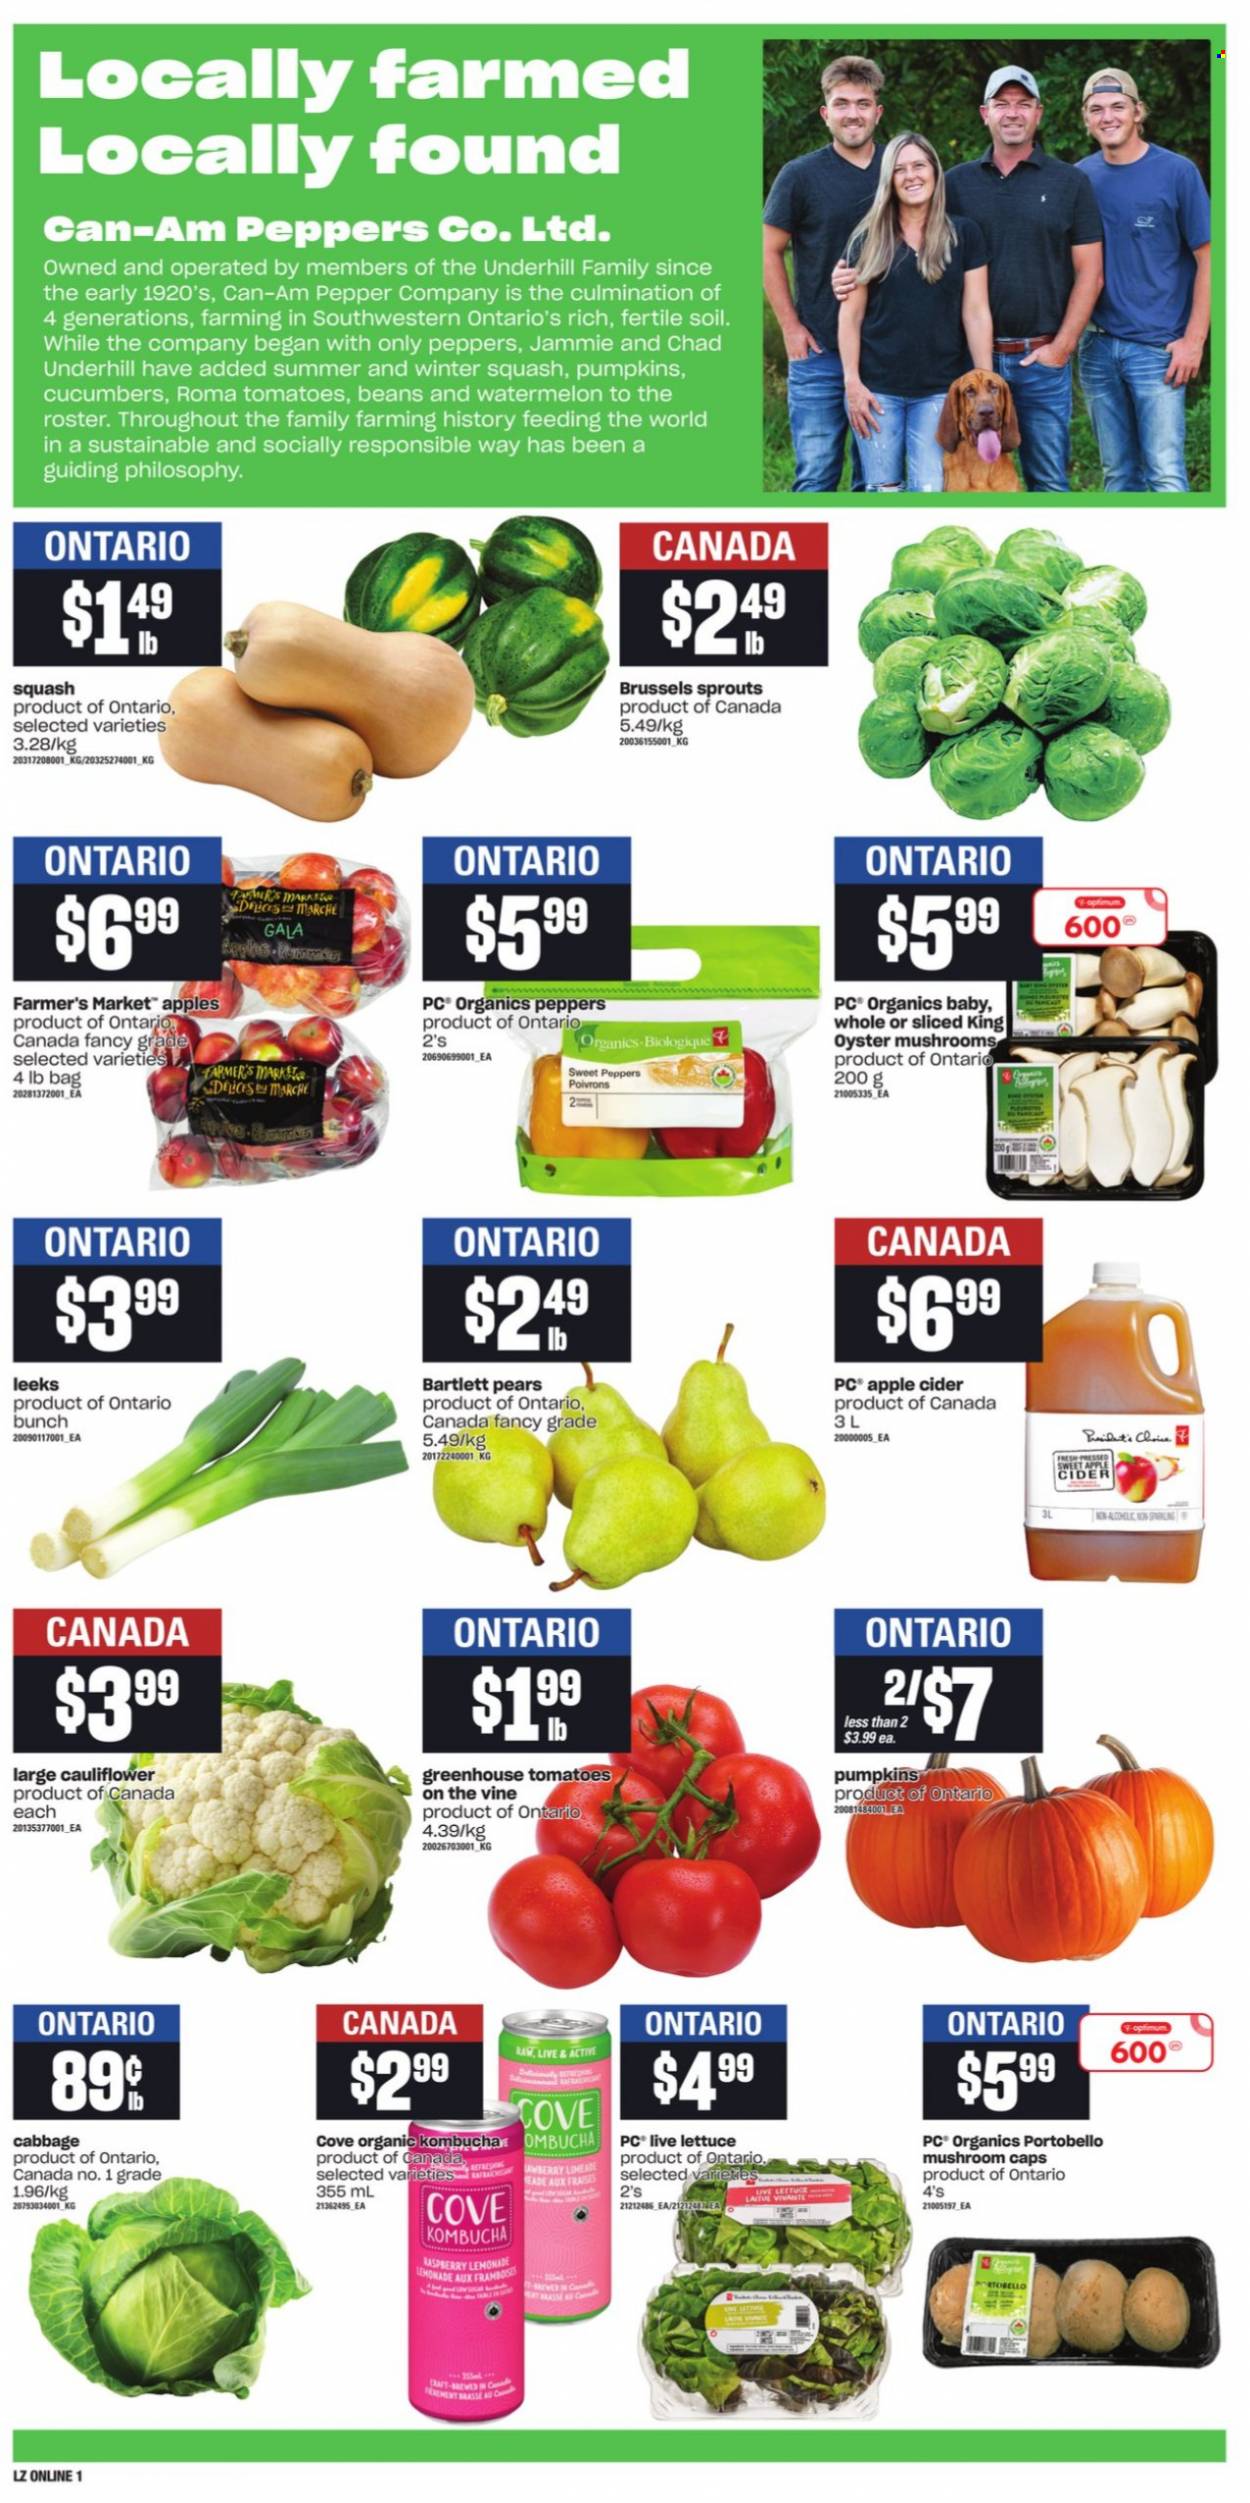 thumbnail - Loblaws Flyer - October 14, 2021 - October 20, 2021 - Sales products - portobello mushrooms, oyster mushrooms, mushrooms, cabbage, cauliflower, sweet peppers, pumpkin, lettuce, brussel sprouts, Bartlett pears, Gala, watermelon, pears, oysters, pepper, lemonade, kombucha, apple cider, cider. Page 4.